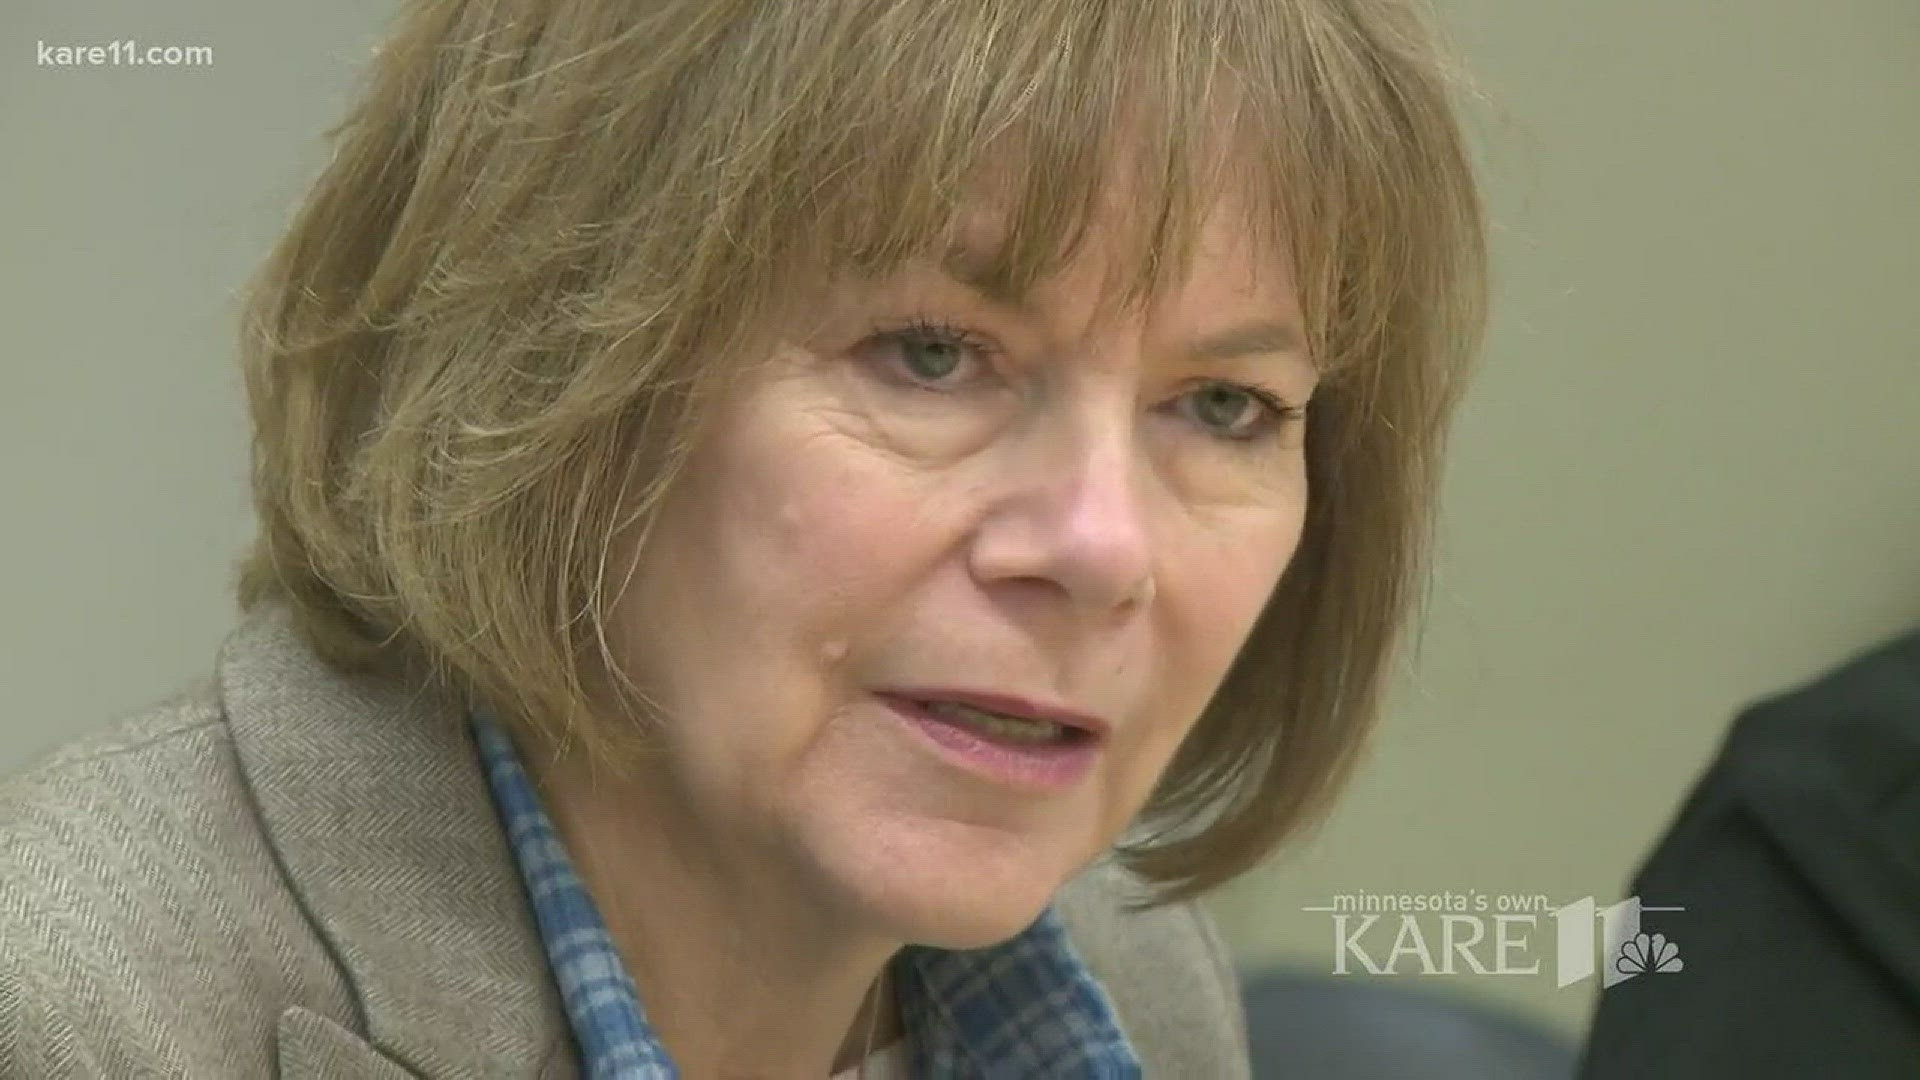 In February, Smith authored a bill that aims to lower medication costs by creating what she calls a "level playing field." https://kare11.tv/2pGx6b5